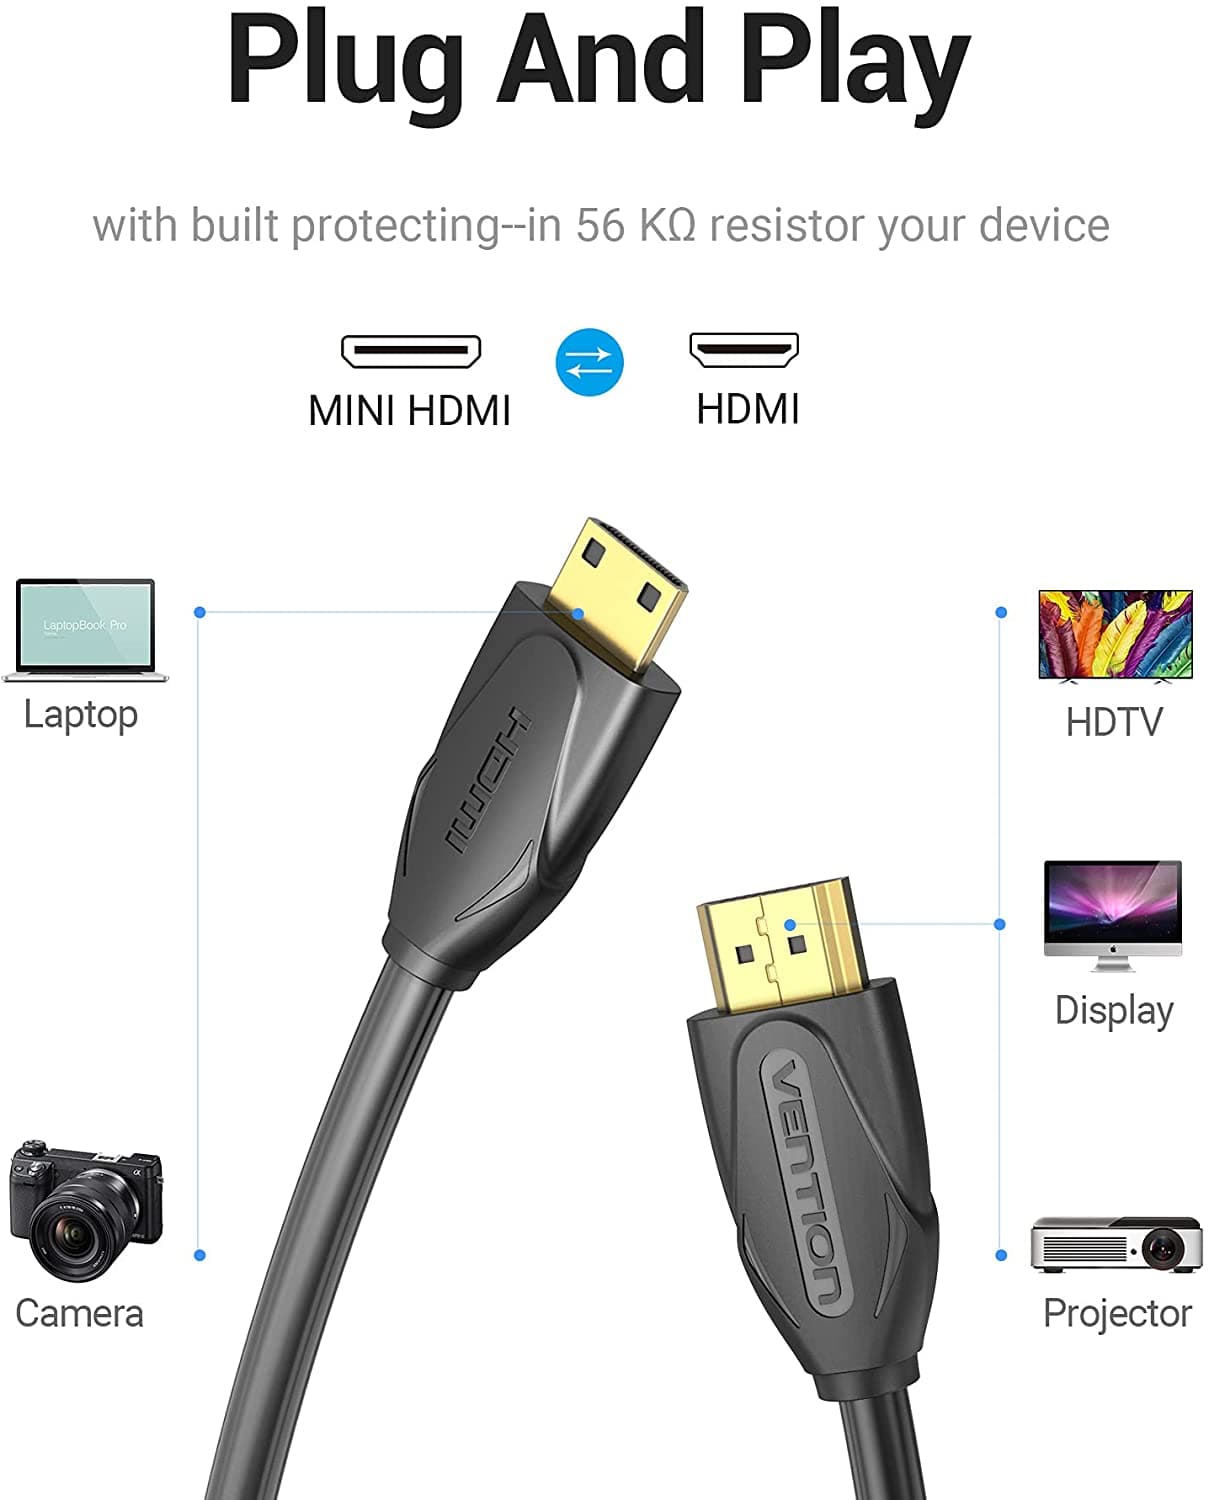 2m Mini HDMI to HDMI Cable with Ethernet - 4K 30Hz High Speed Mini HDMI to  HDMI Adapter Cable - Mini HDMI Type-C Device to HDMI Monitor/Display 